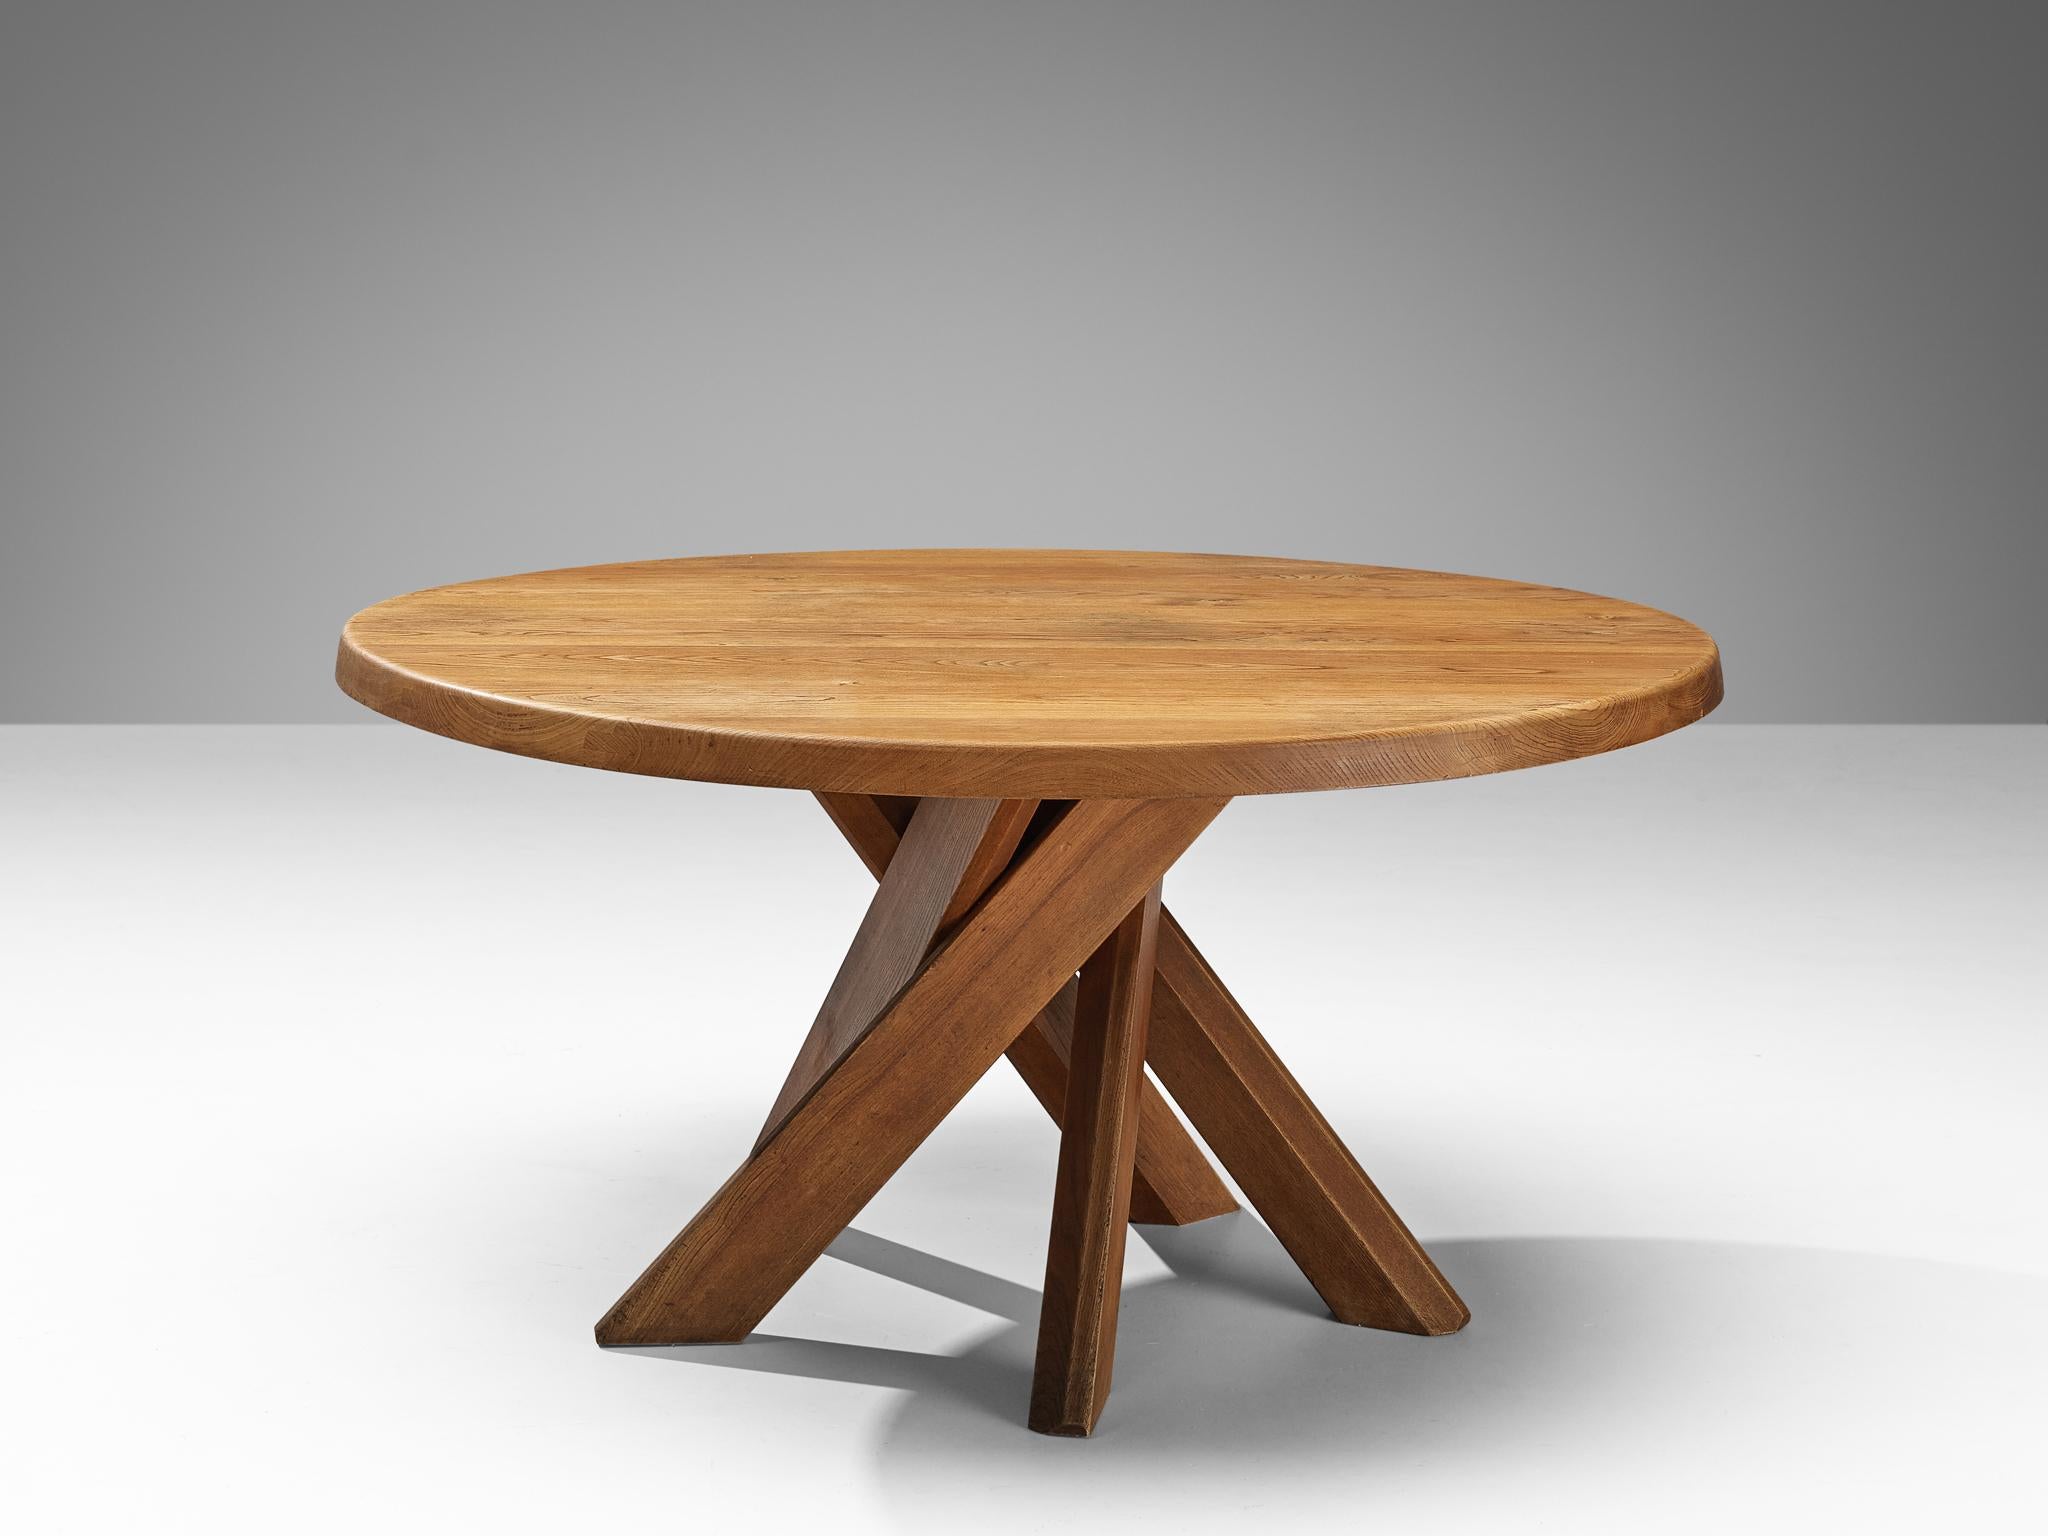 Pierre Chapo, dining table model 'T21D', elm, France, 1973.

This design is an early edition, created according to the original craft methodology of Pierre Chapo. This round 'T21D' dining table its top has a diameter of 140 cm (63 in). The shape